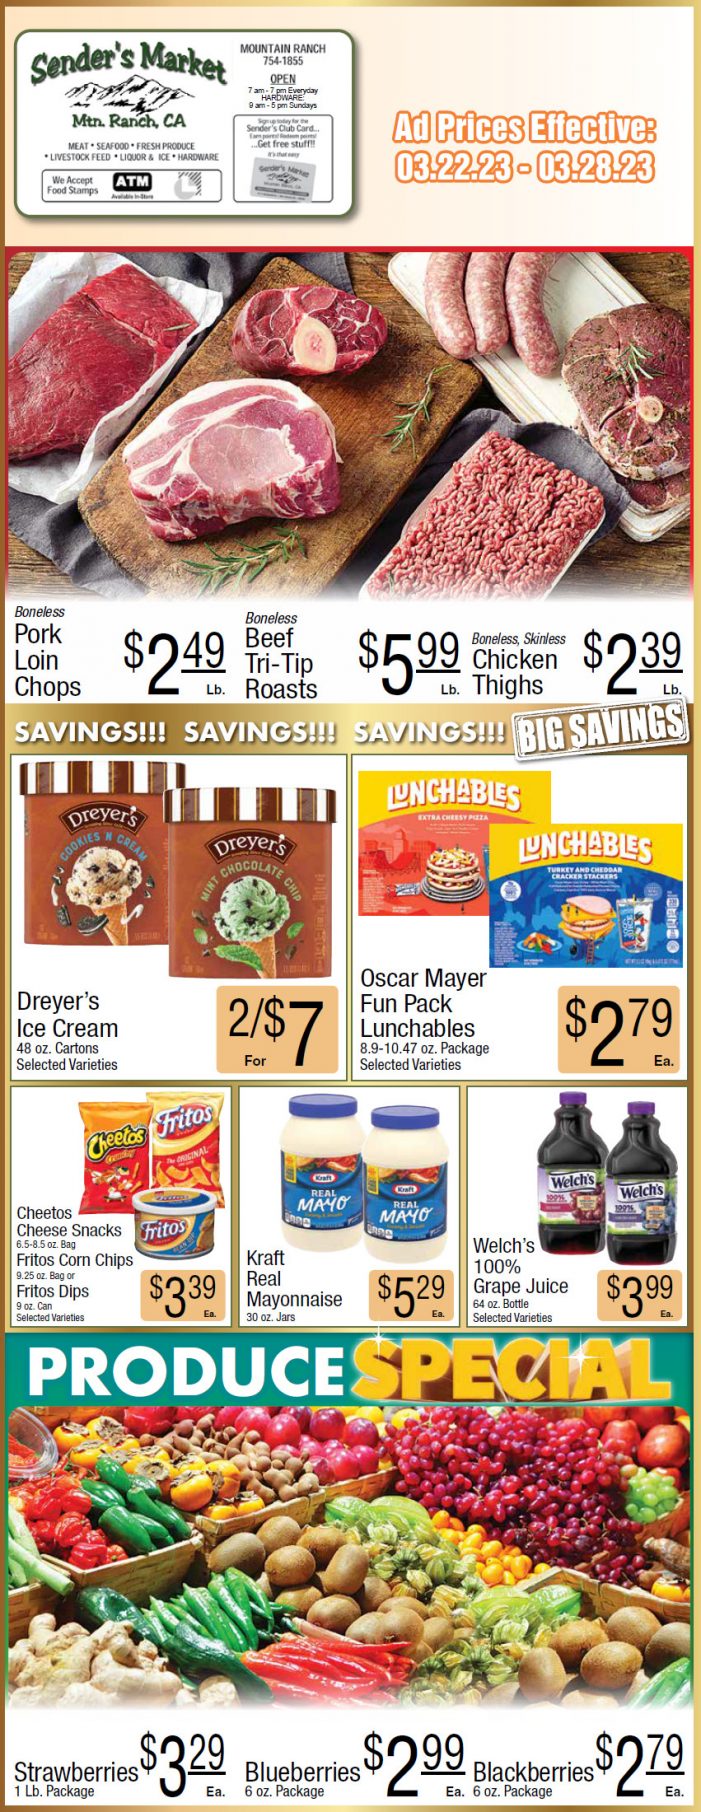 Sender’s Market Weekly Ad & Grocery Specials March 22 – 28th! Shop Local & Save!!